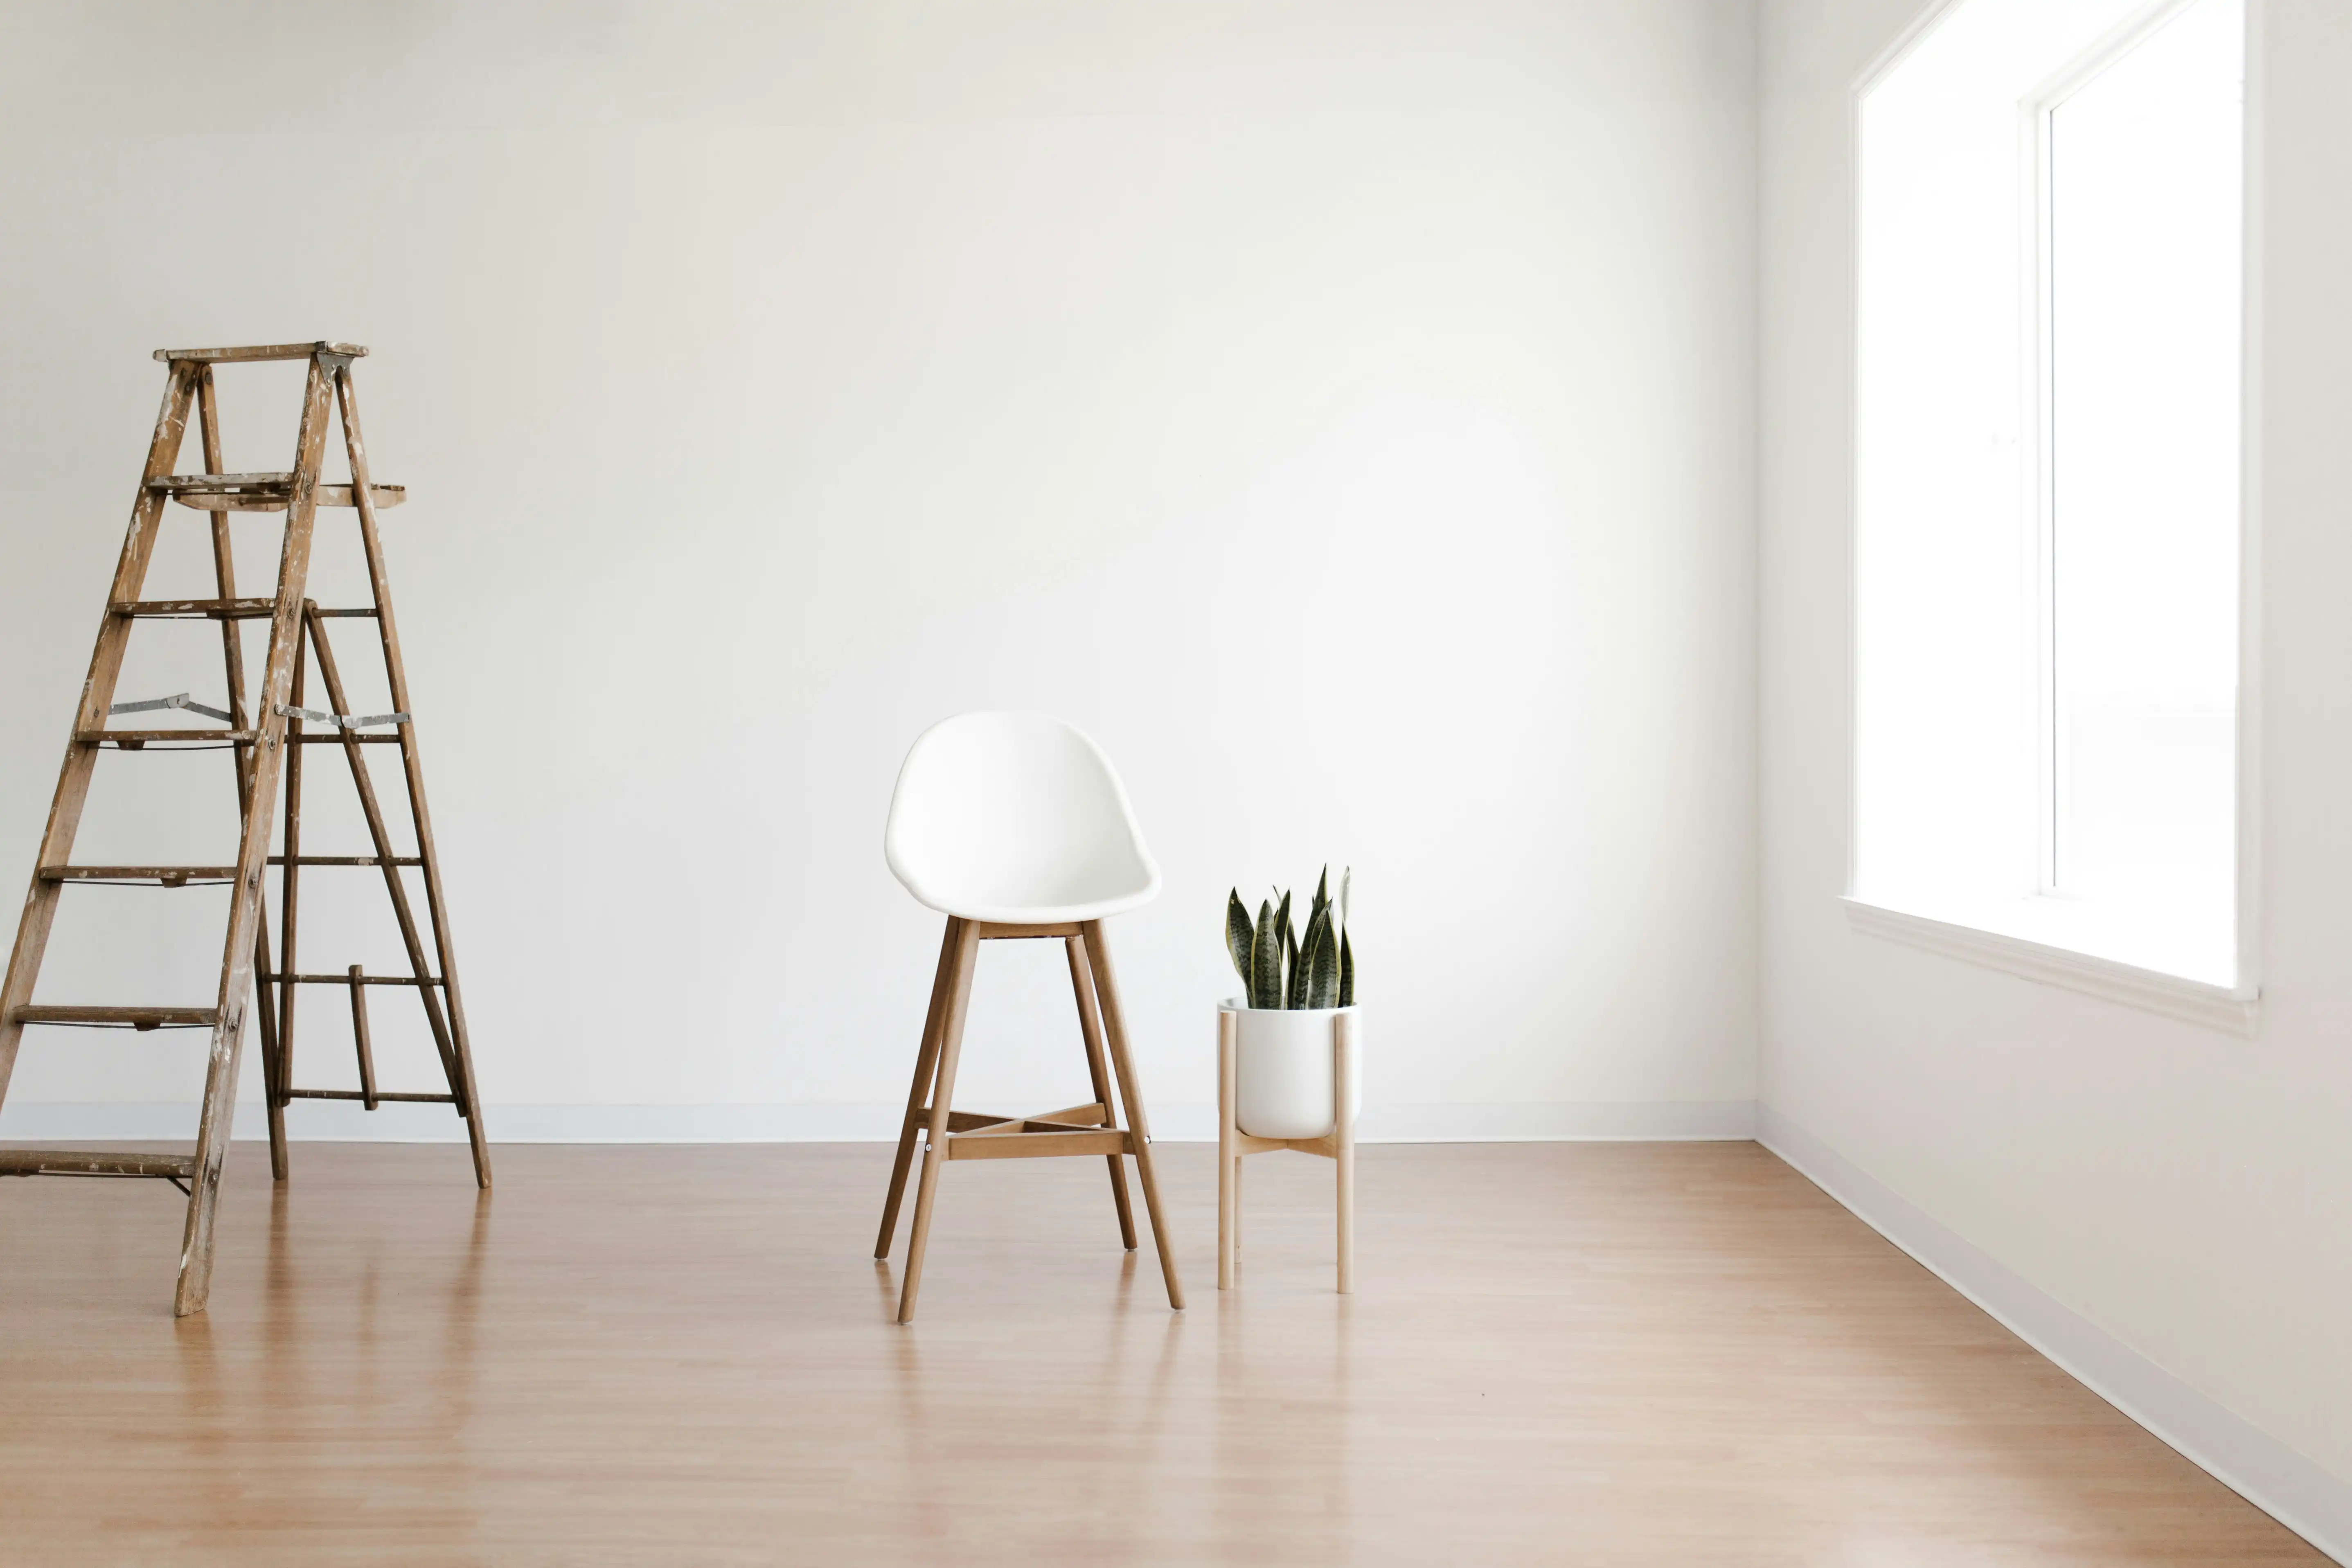 empty room with ladder, chair and plant